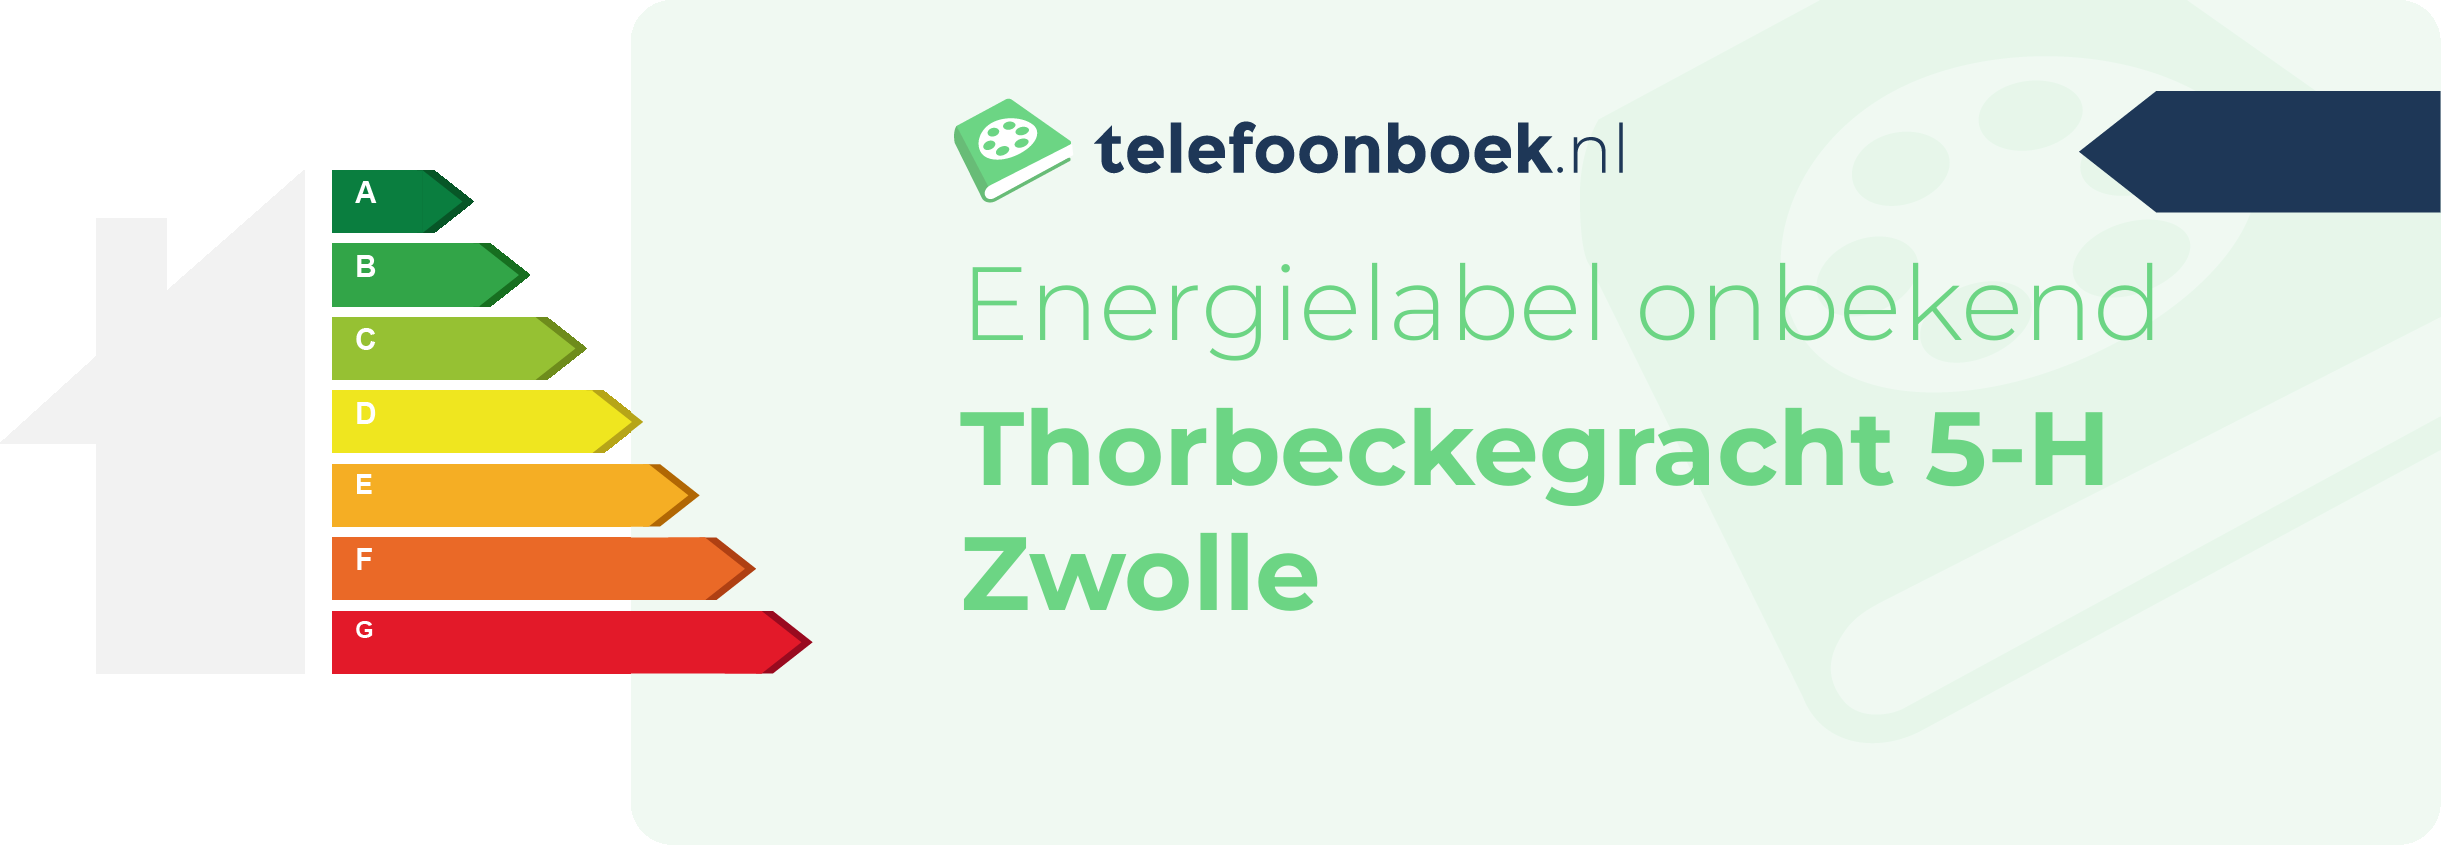 Energielabel Thorbeckegracht 5-H Zwolle